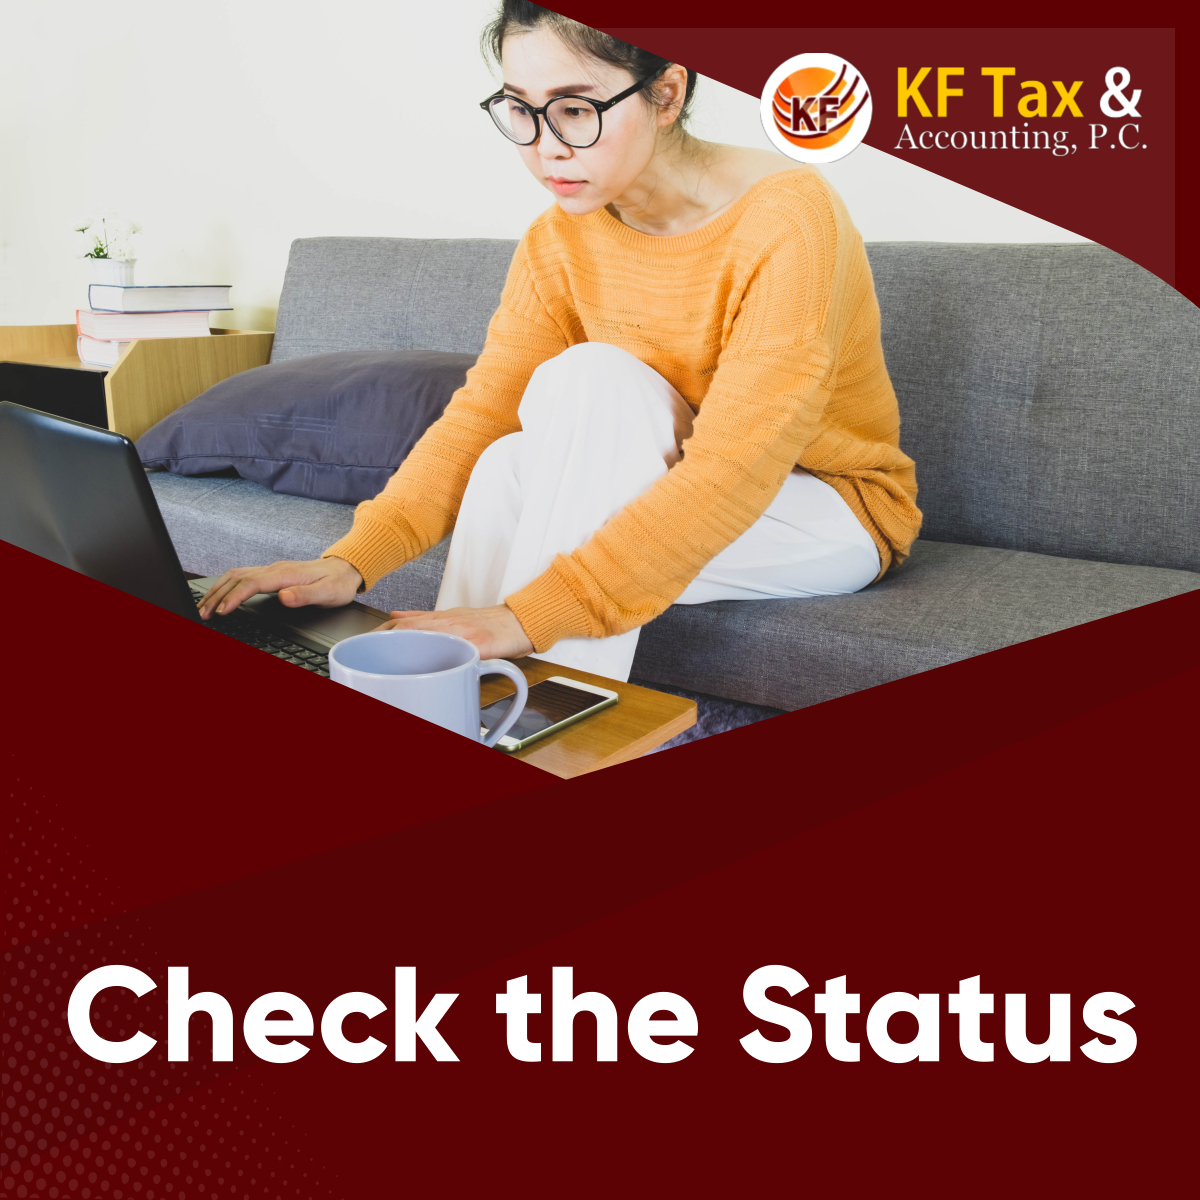 After filing an amended return, make sure to always check the status three weeks after filing.

Read more: facebook.com/kftaxpc/posts/…

#RoundRockTX #TaxAndAccountingServices #CheckStatus #AmendedReturn #TaxReturn